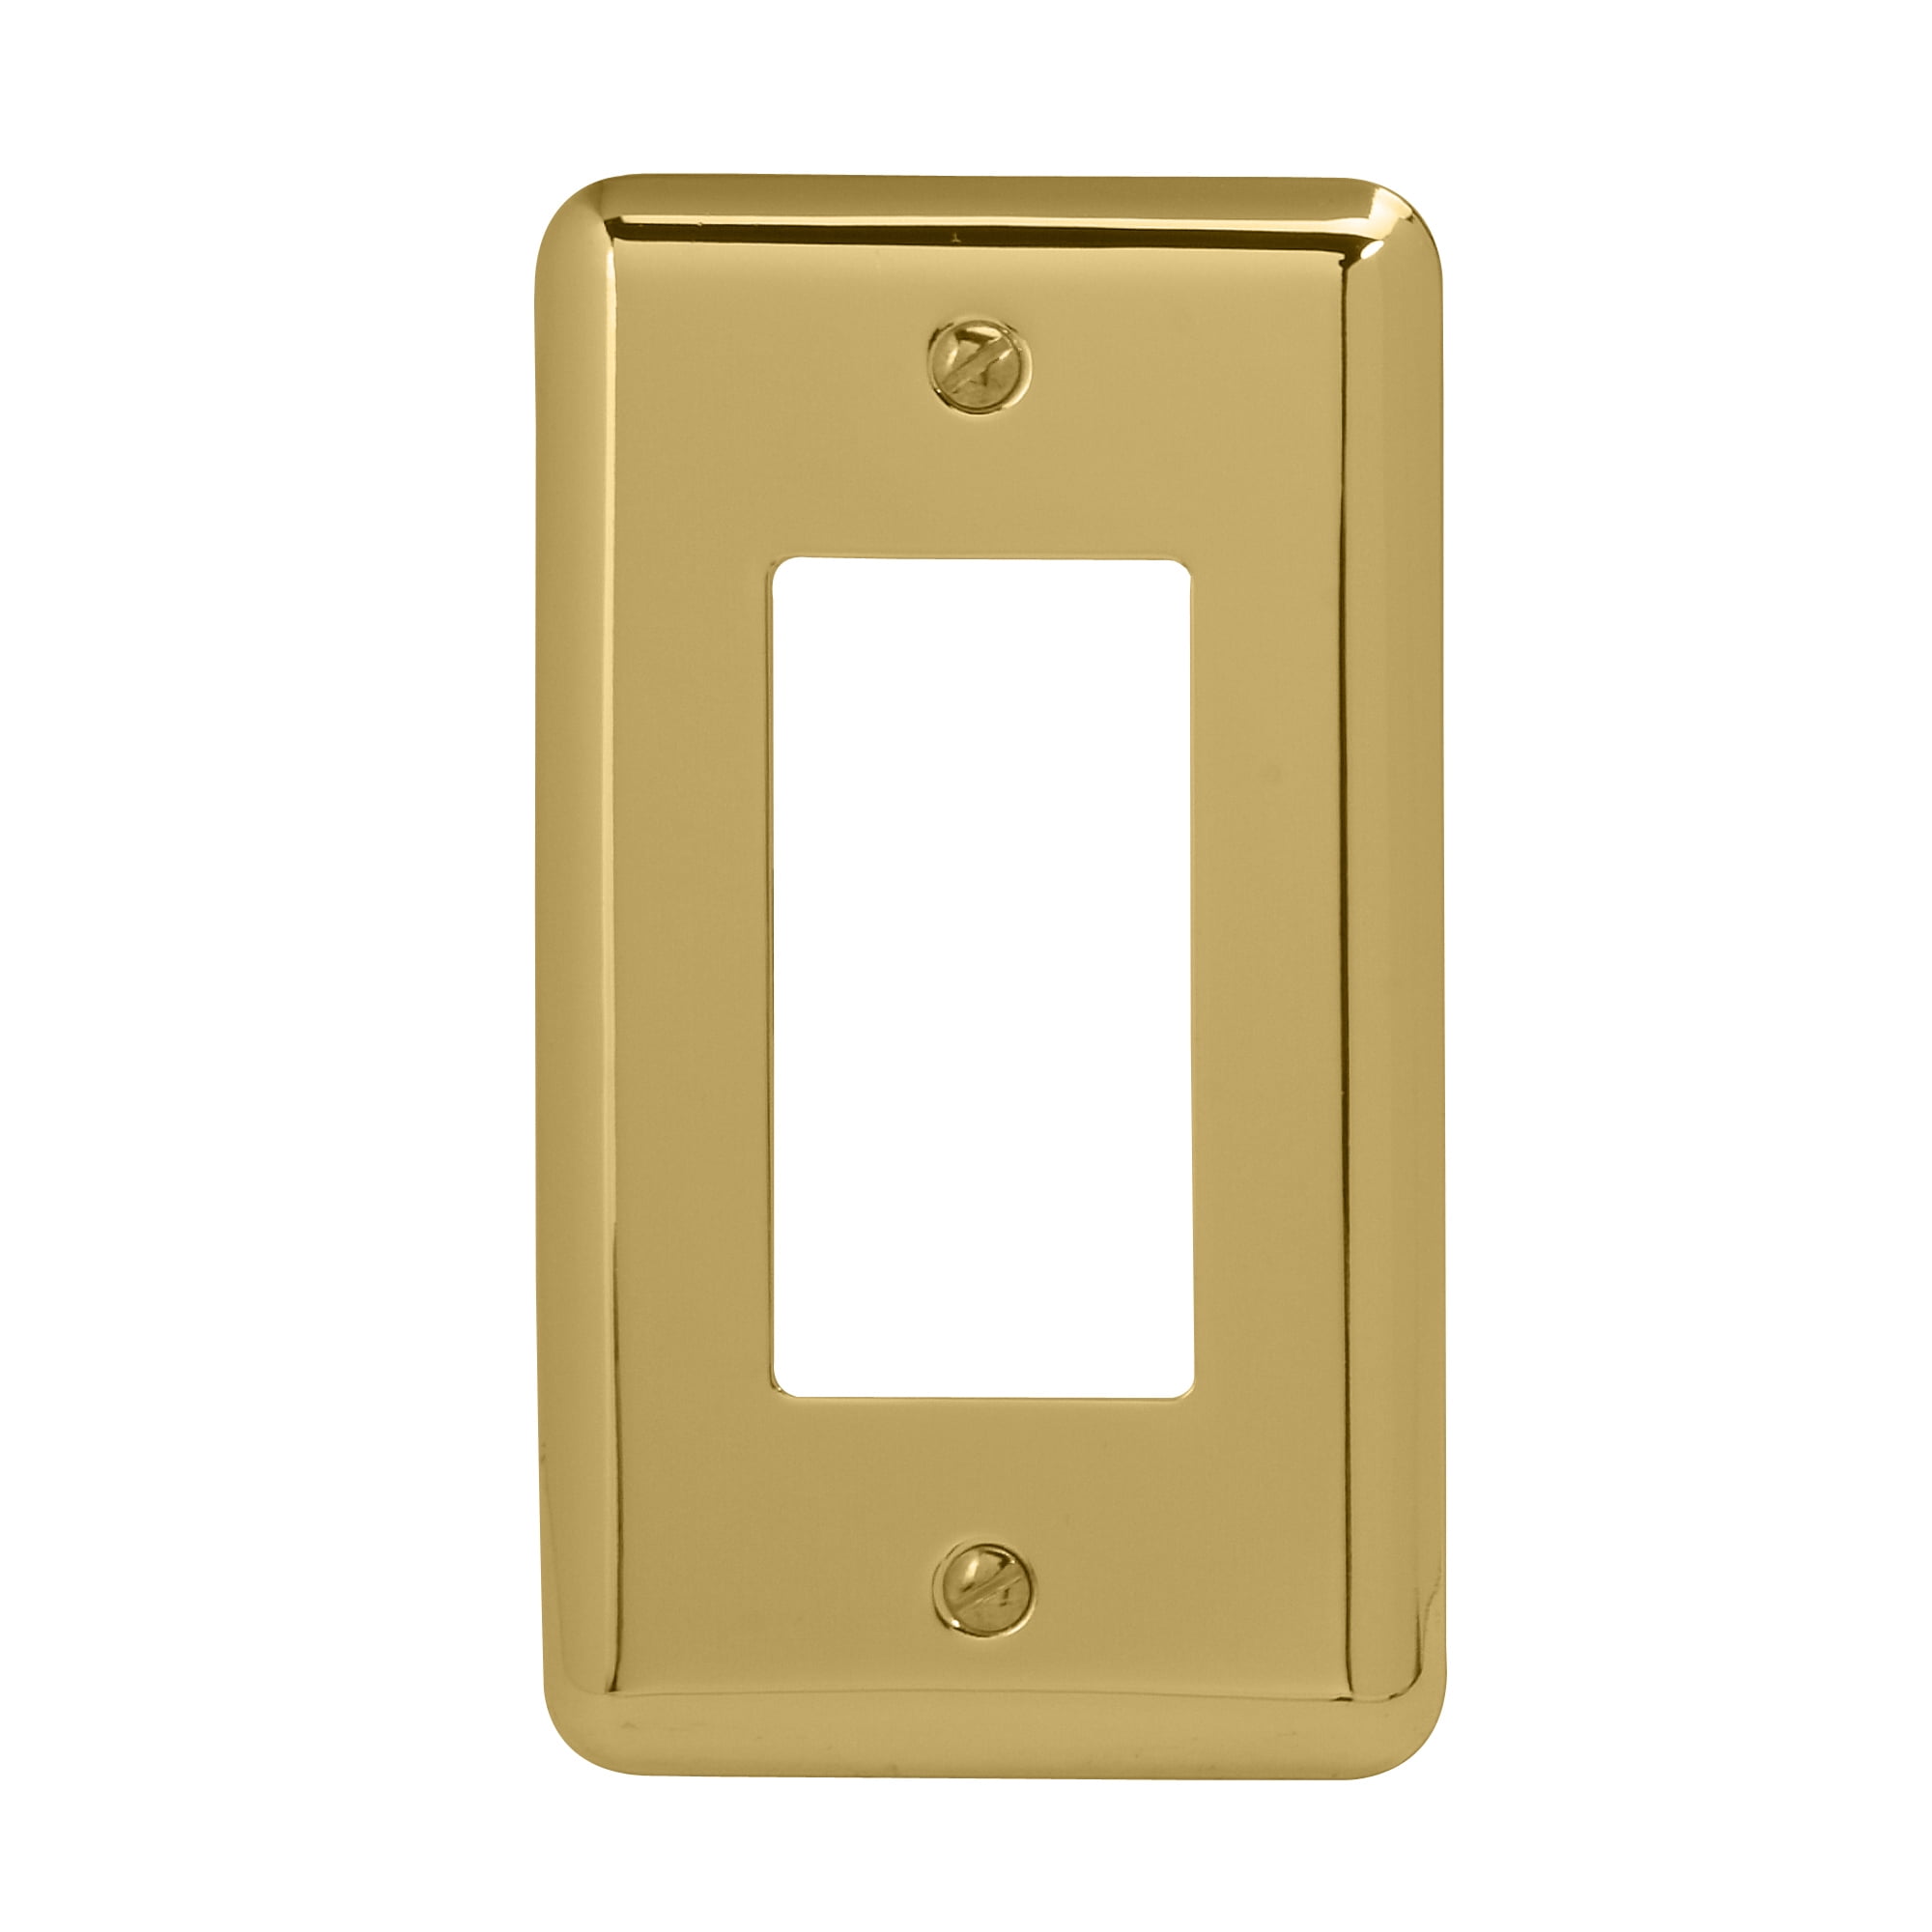 Brushed Brass Devon Switch Plate Wallplate Duplex Outlet Cover Toggle Rocker GFI 